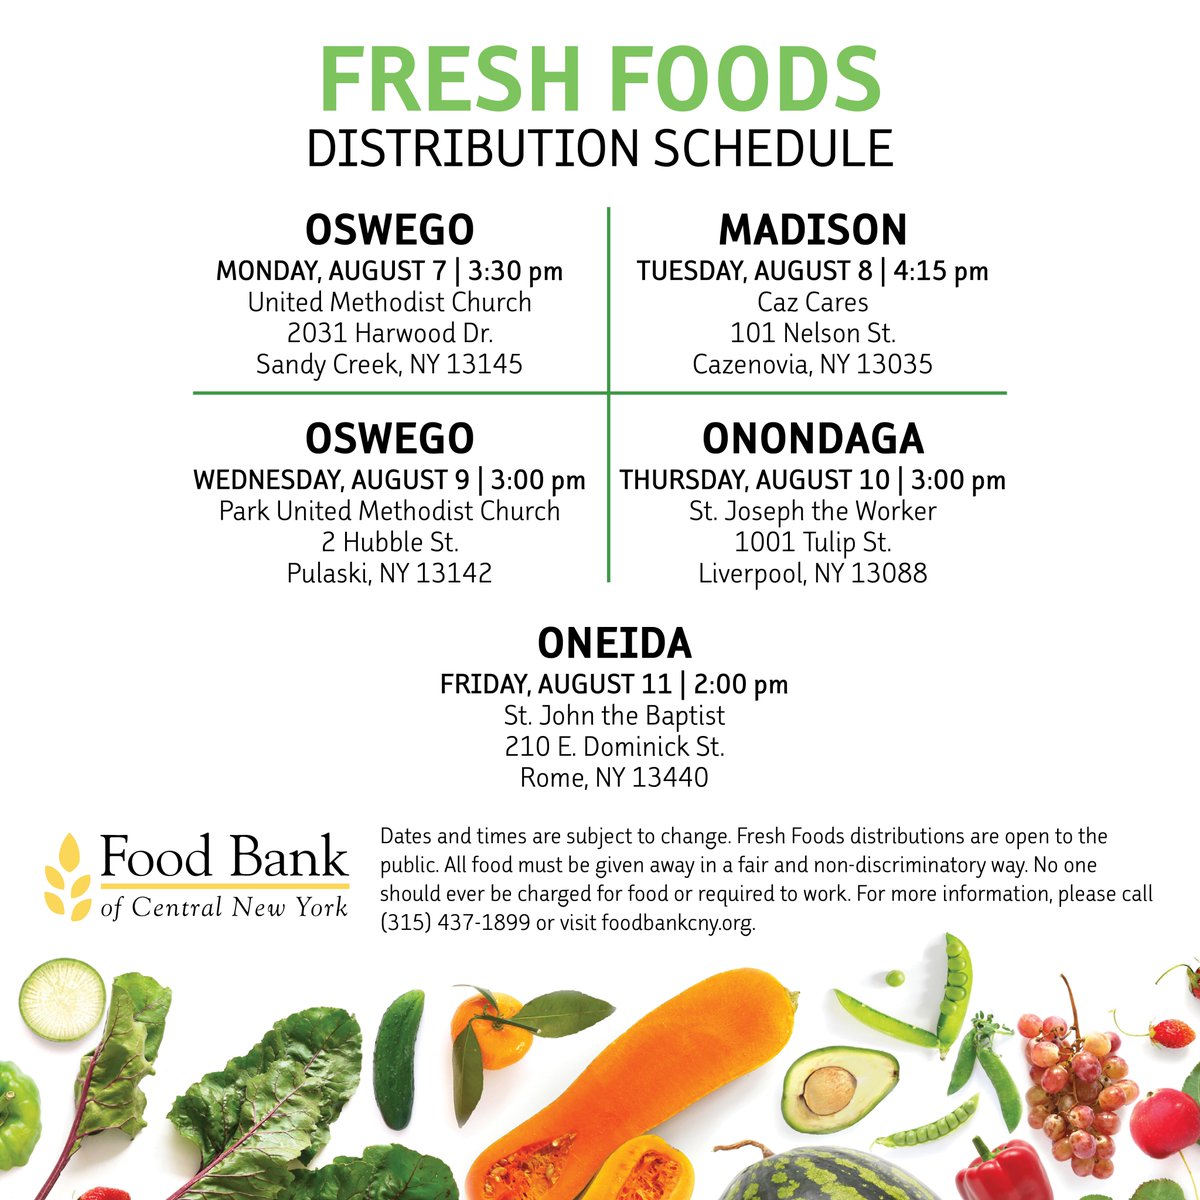 Looking for fresh food items at no cost? We're here to help!

🚛: Our Mobile Food Pantry will be in #Marietta, #Munnsville, #PortByron, and #Syracuse.

🍎: Food Bank partner agencies are hosting distributions in #SandyCreek, #Cazenovia, #Pulaski, #Liverpool, and #Rome